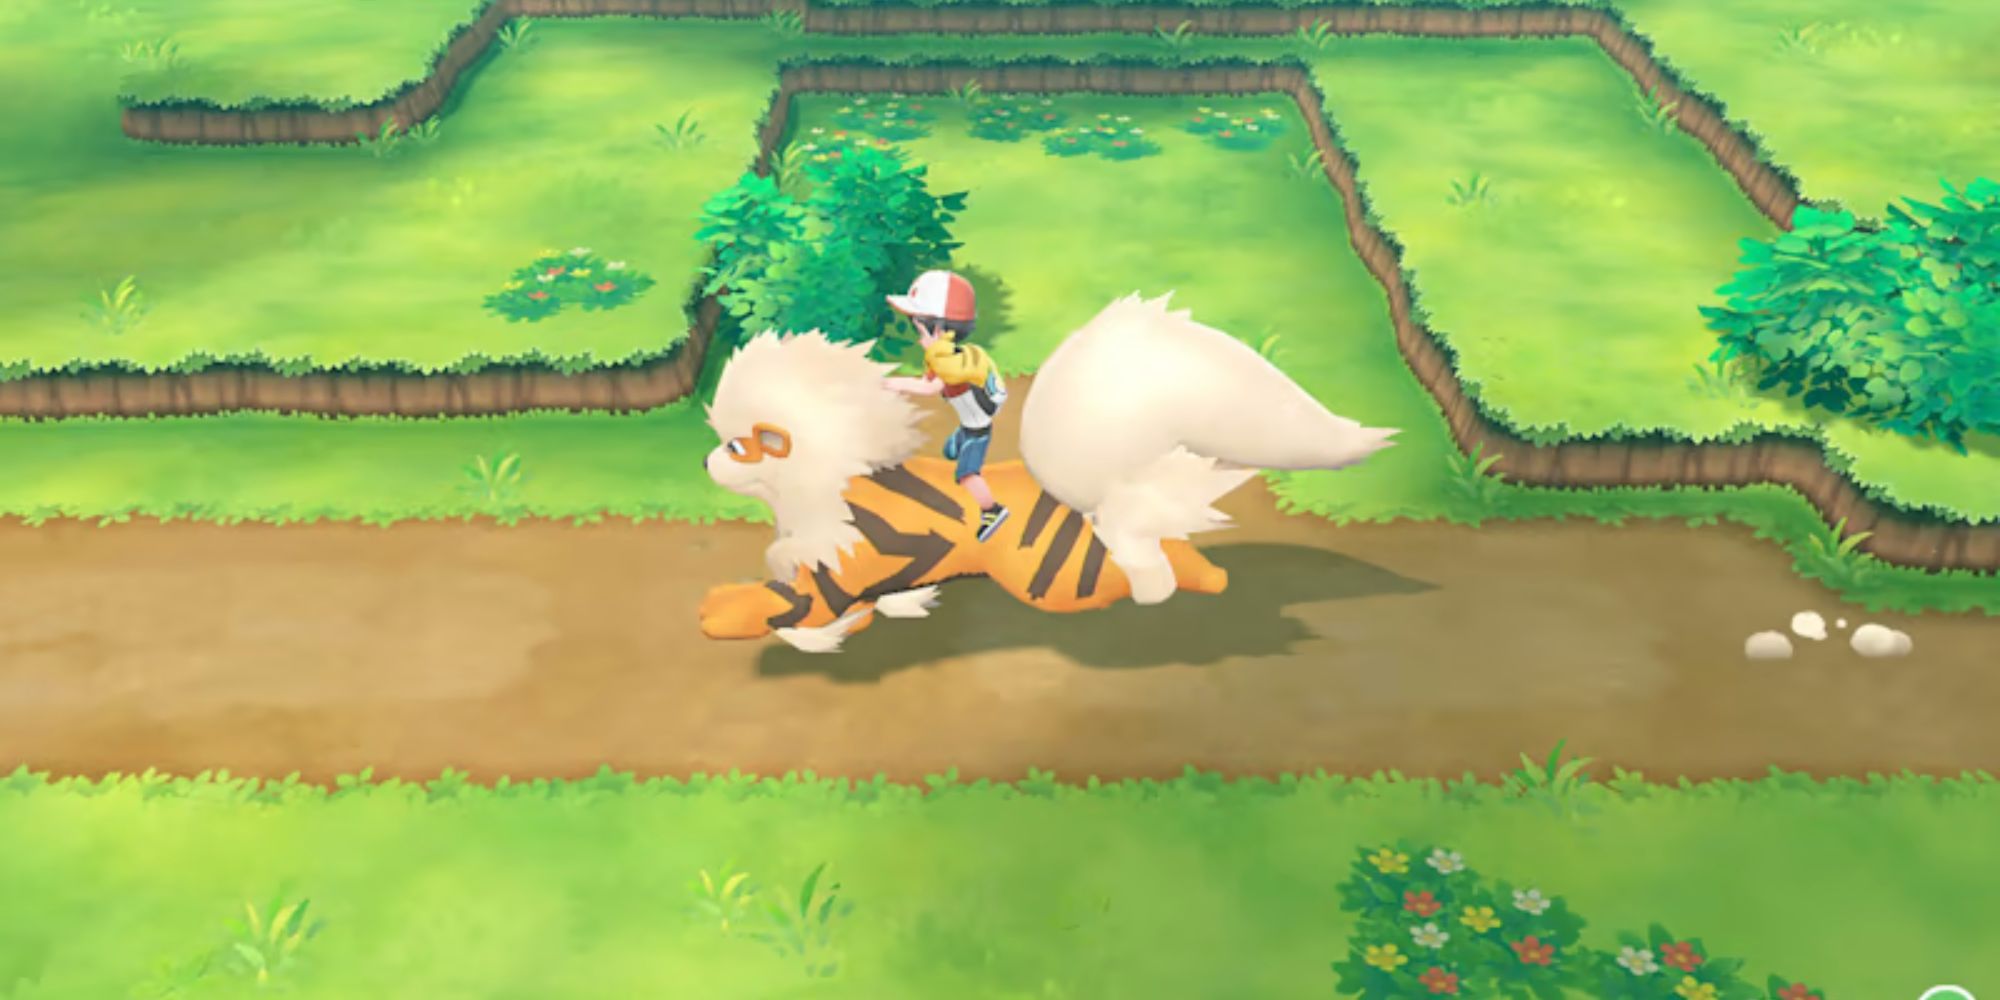 A Pokemon trainer rides a Arcanine down a route